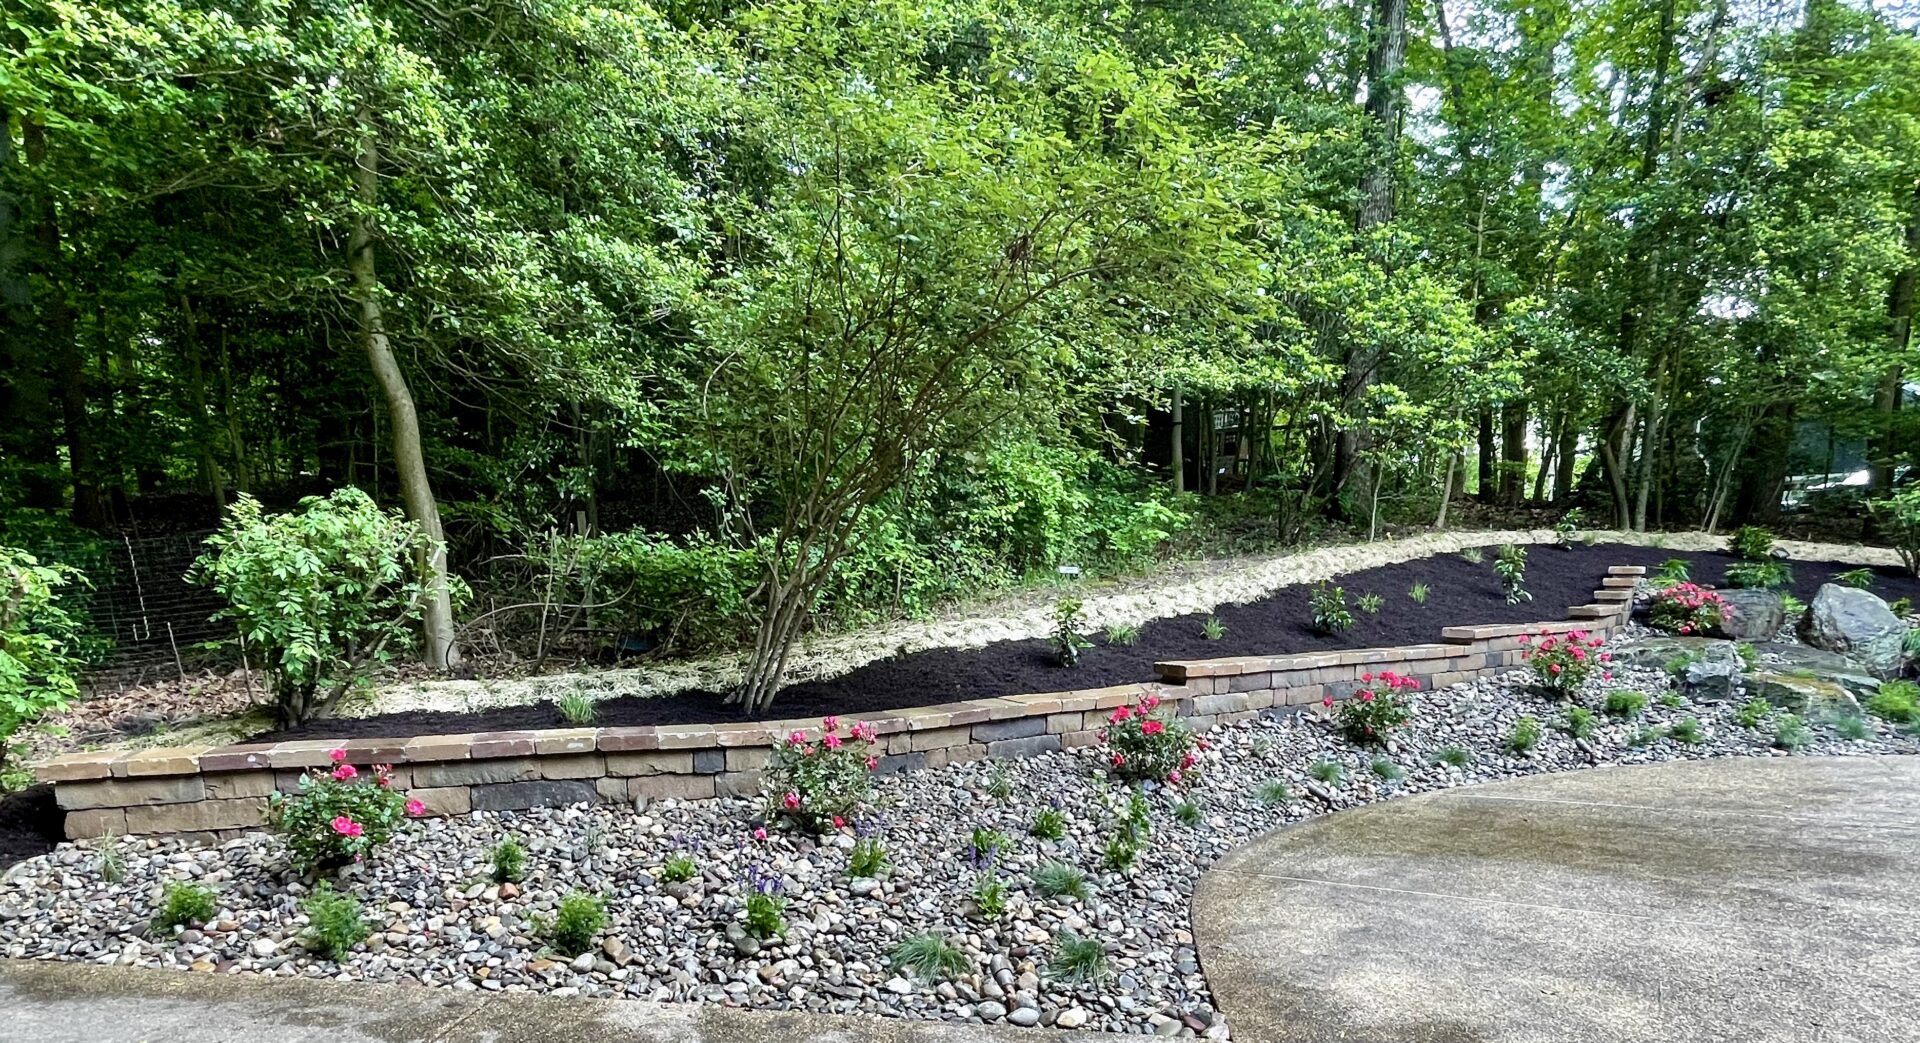 A garden with rocks and plants in the background.